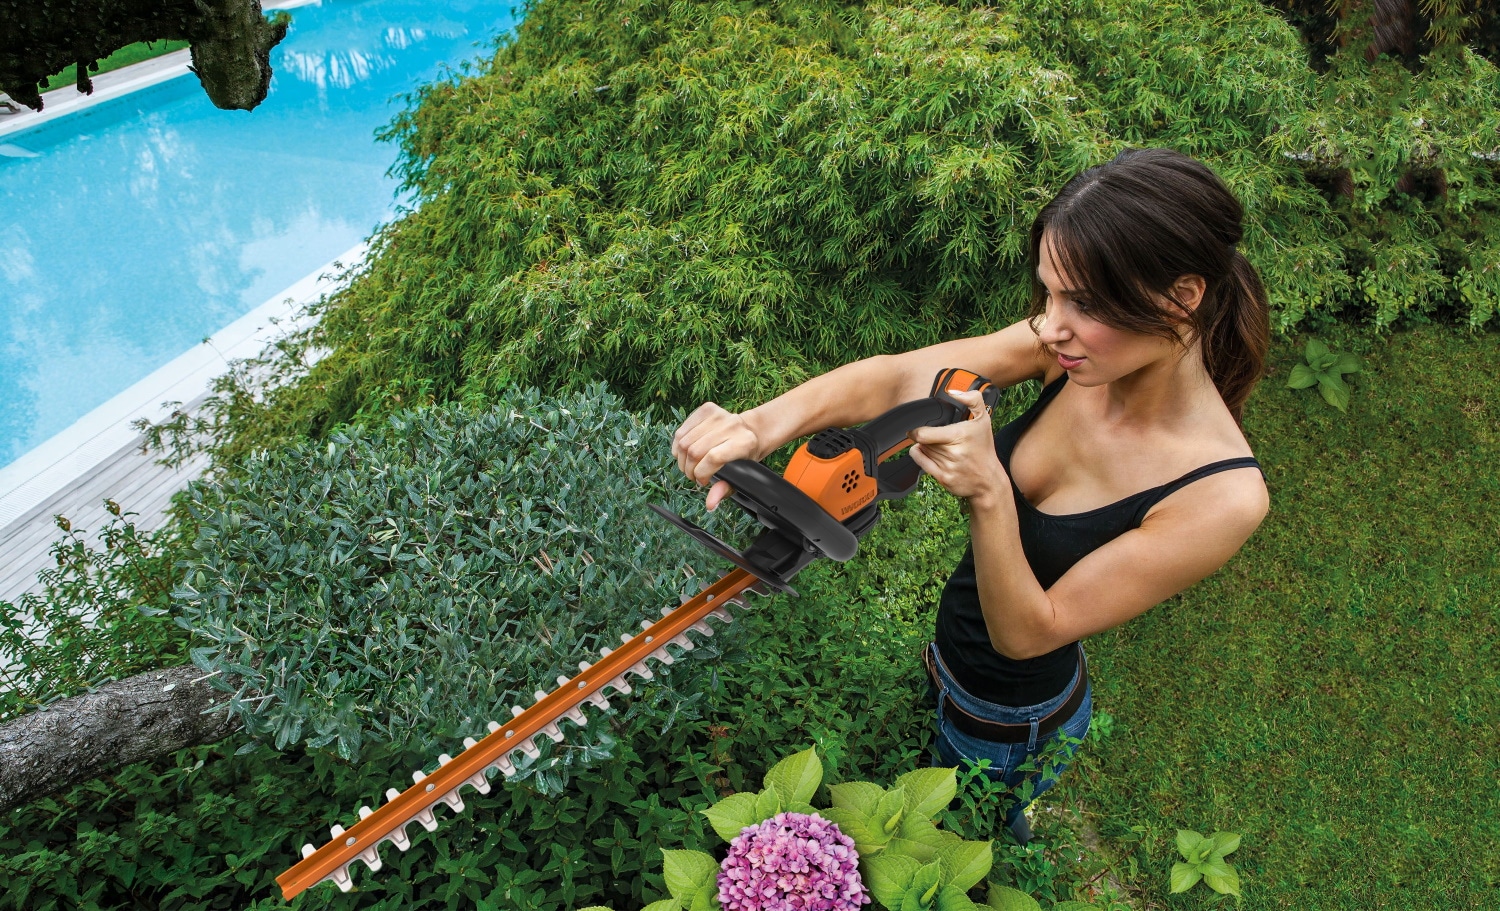 6 Most Effective Electric Hedge Trimmers the Market Has to Offer